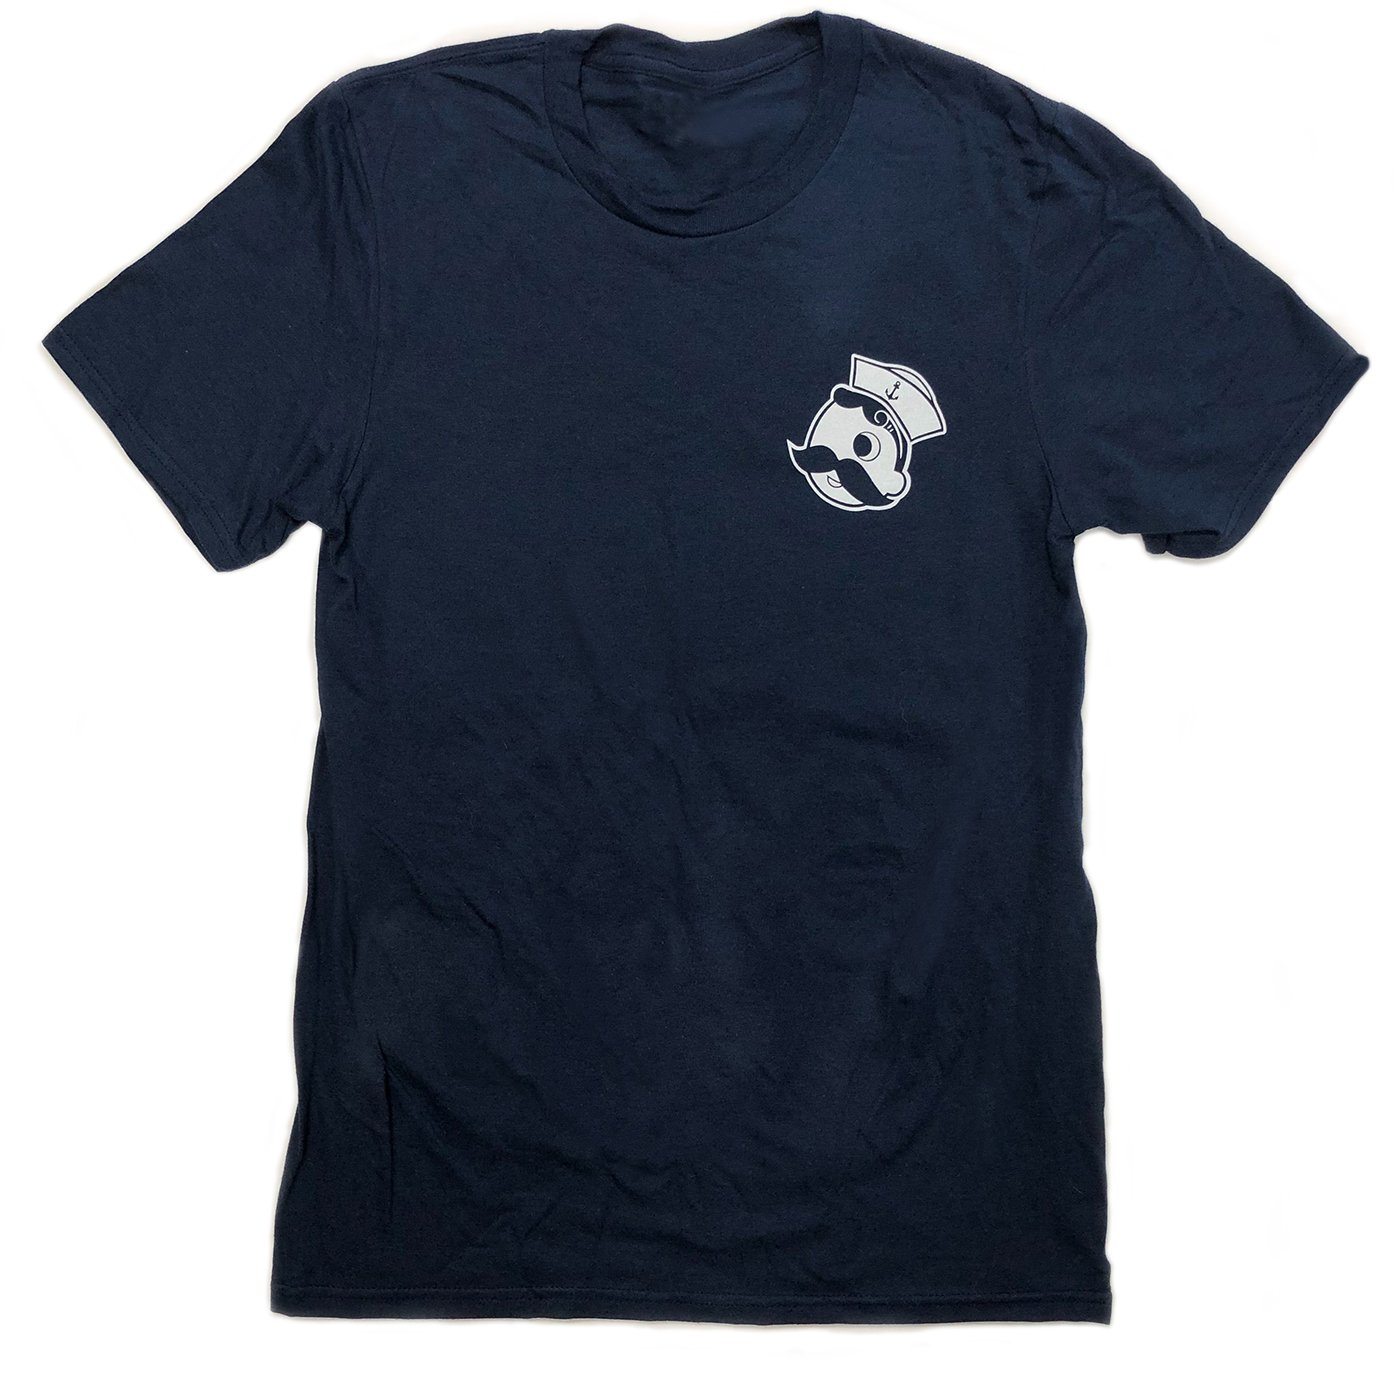 Natty Boh Sailor Gets Drafted (Navy) / Shirt - Route One Apparel